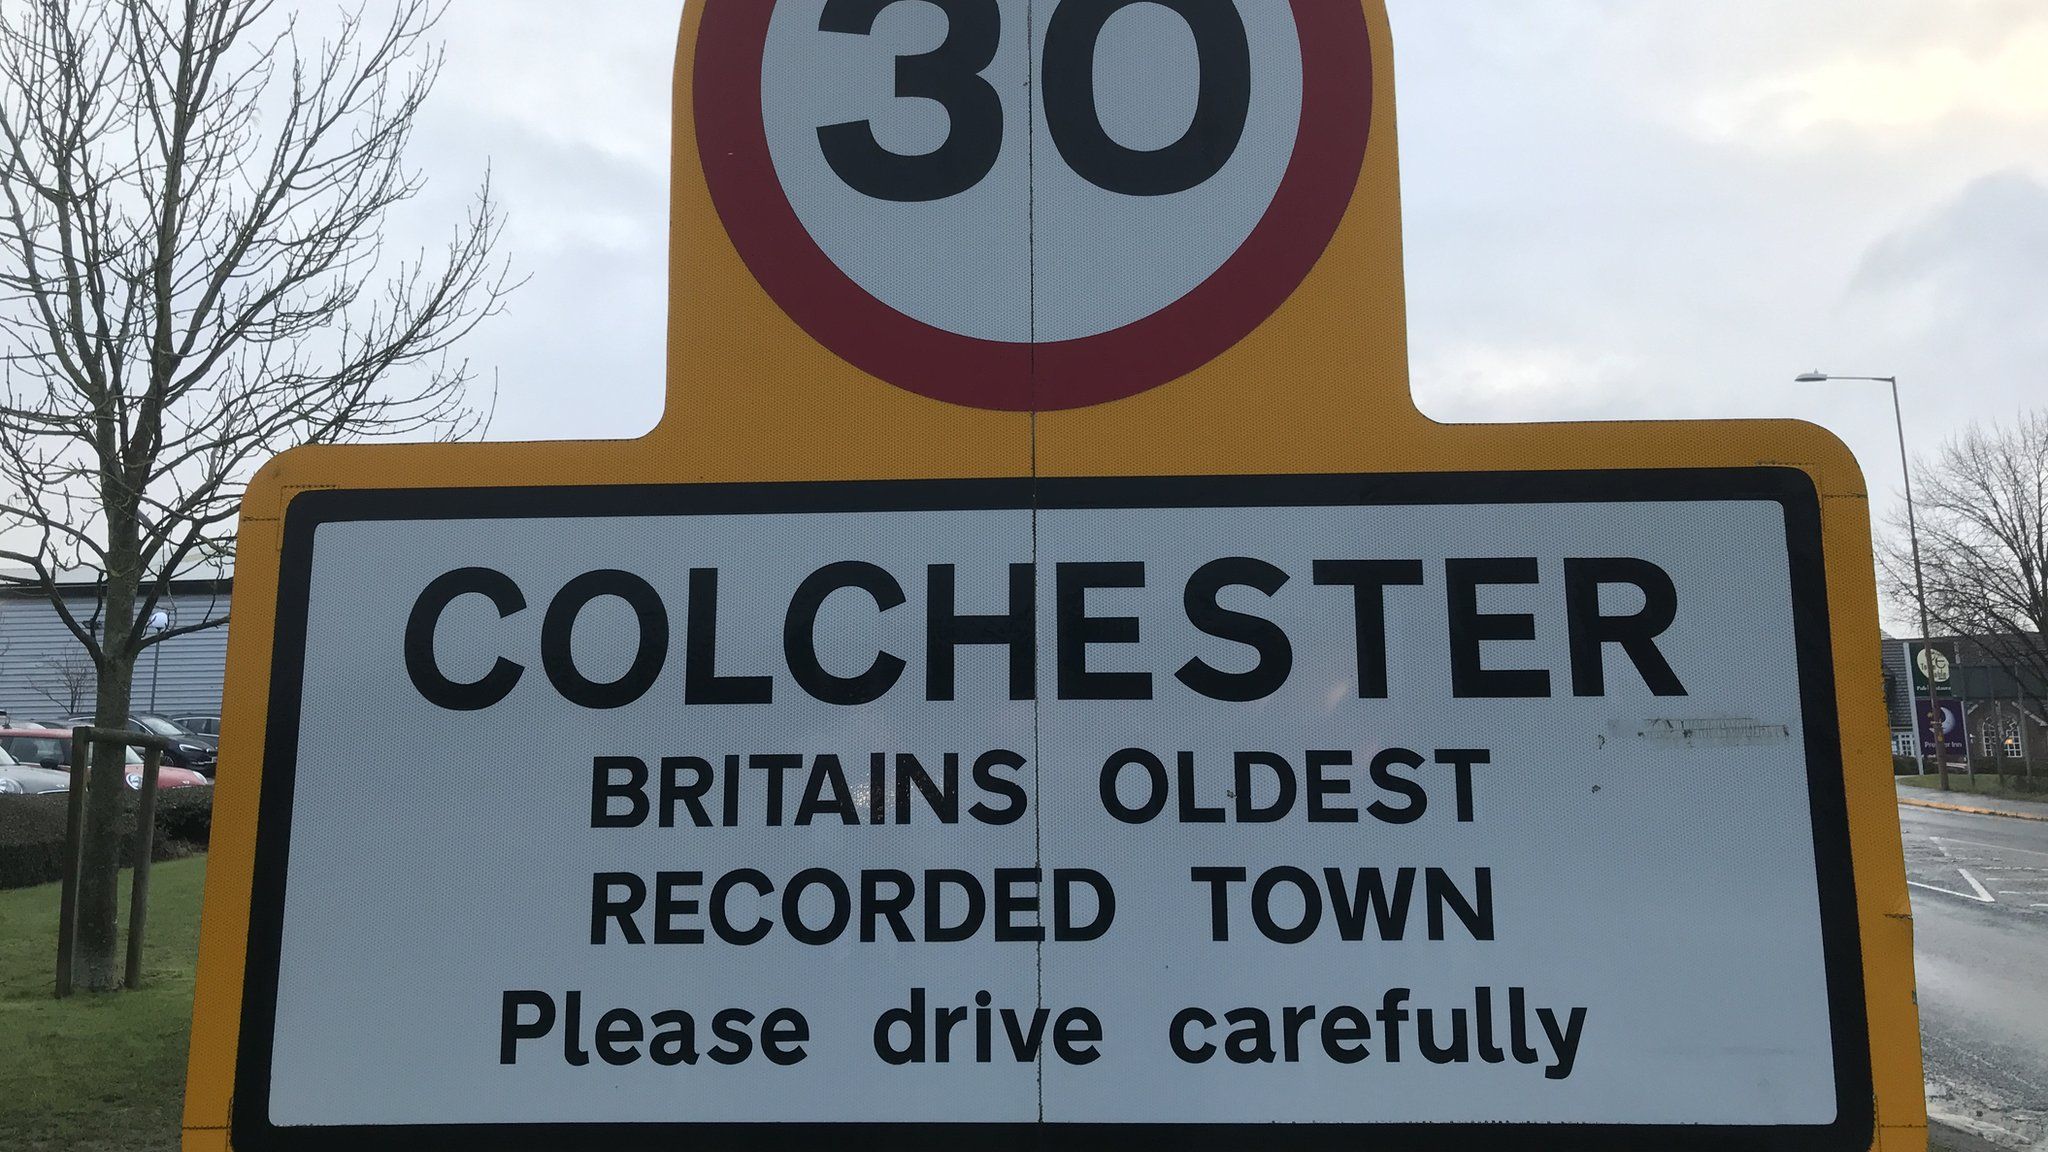 Colchester - Britain's Oldest Recorded Town sign